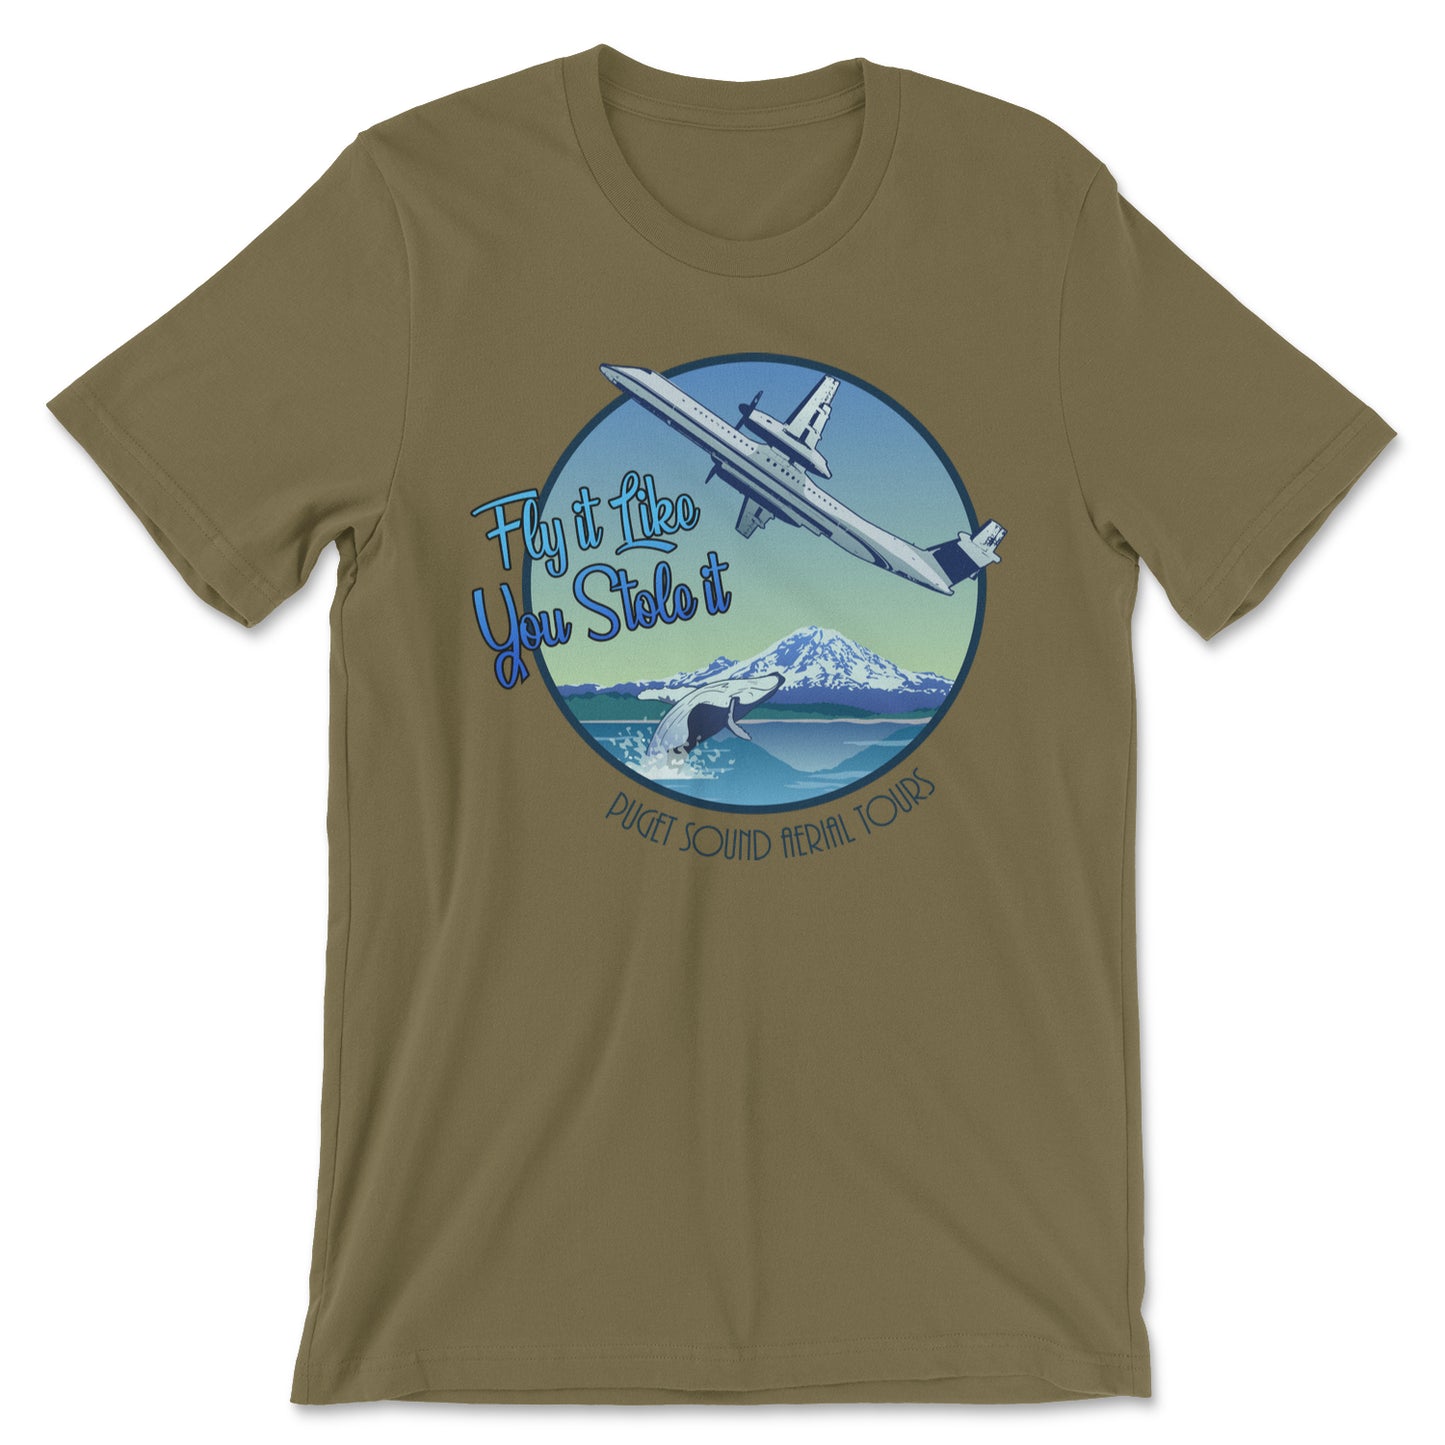 Fly It Like You Stole It (Puget Sound Aerial Tours) Tee